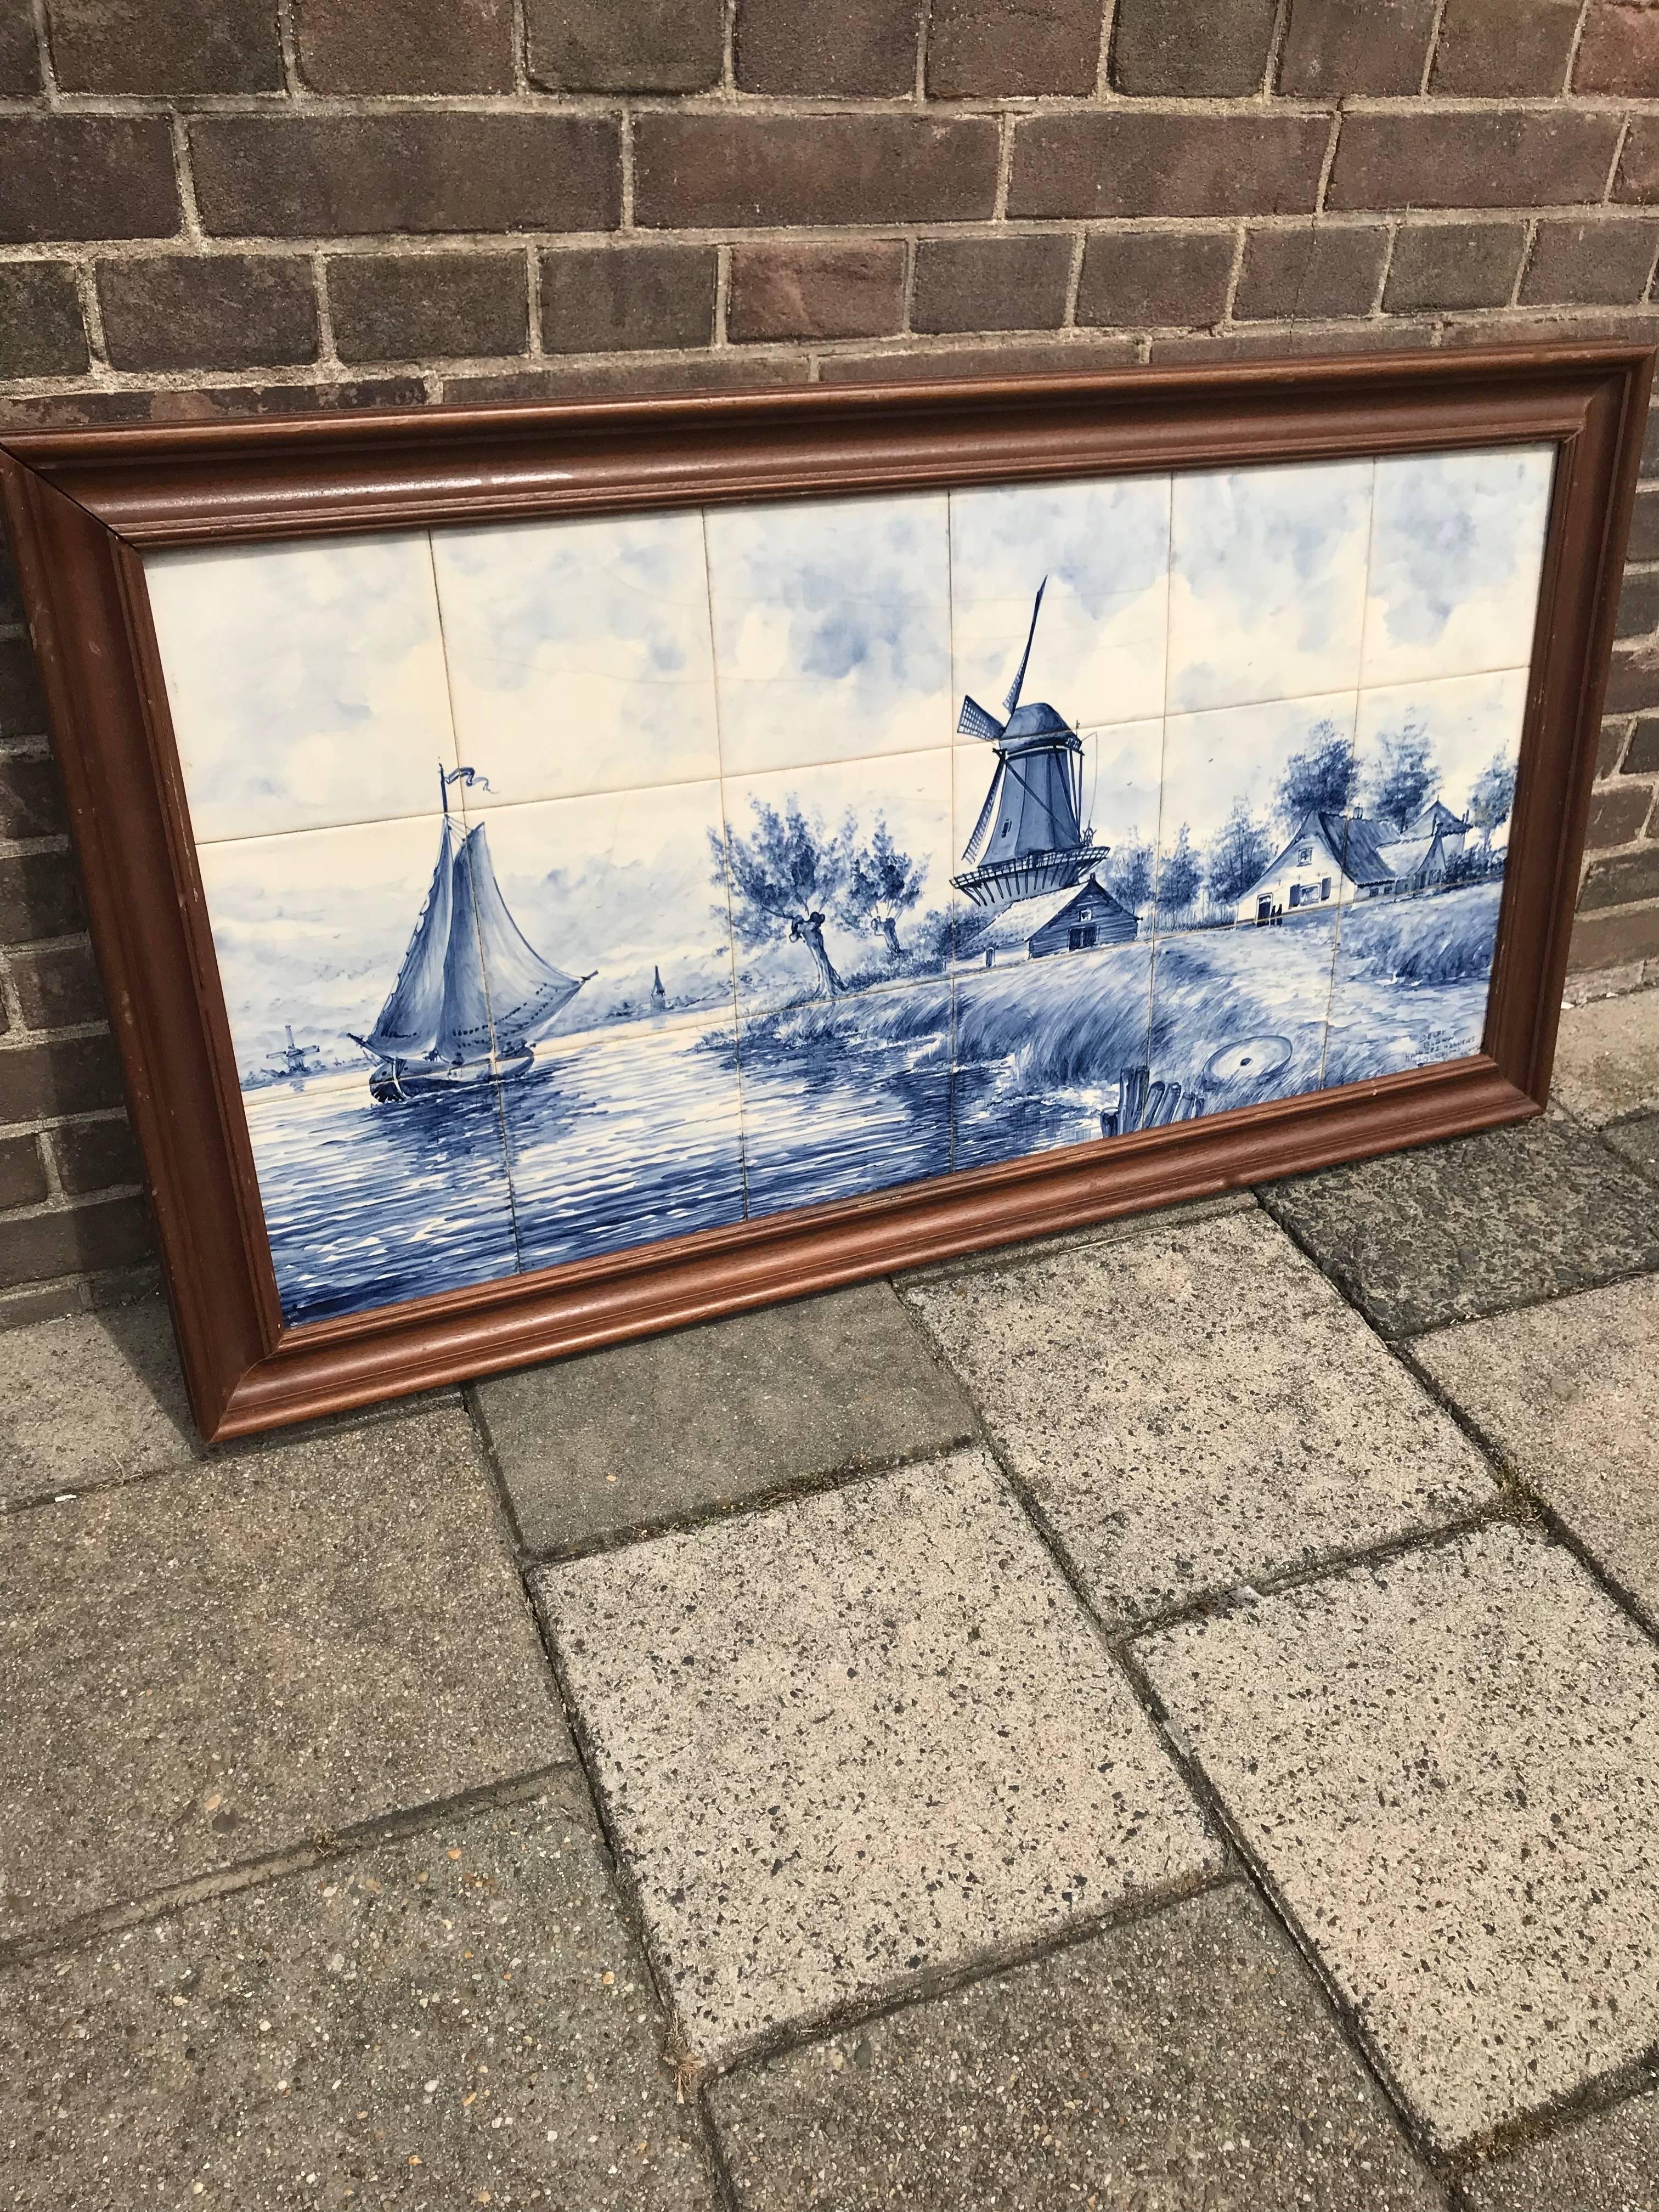 Stunning 18 tiles wall picture in a wooden frame.

In this large picture the art of painting and the art of making ceramic tiles have been combined and the result is an absolute joy to own and look at. This realistic and romantic at the same time